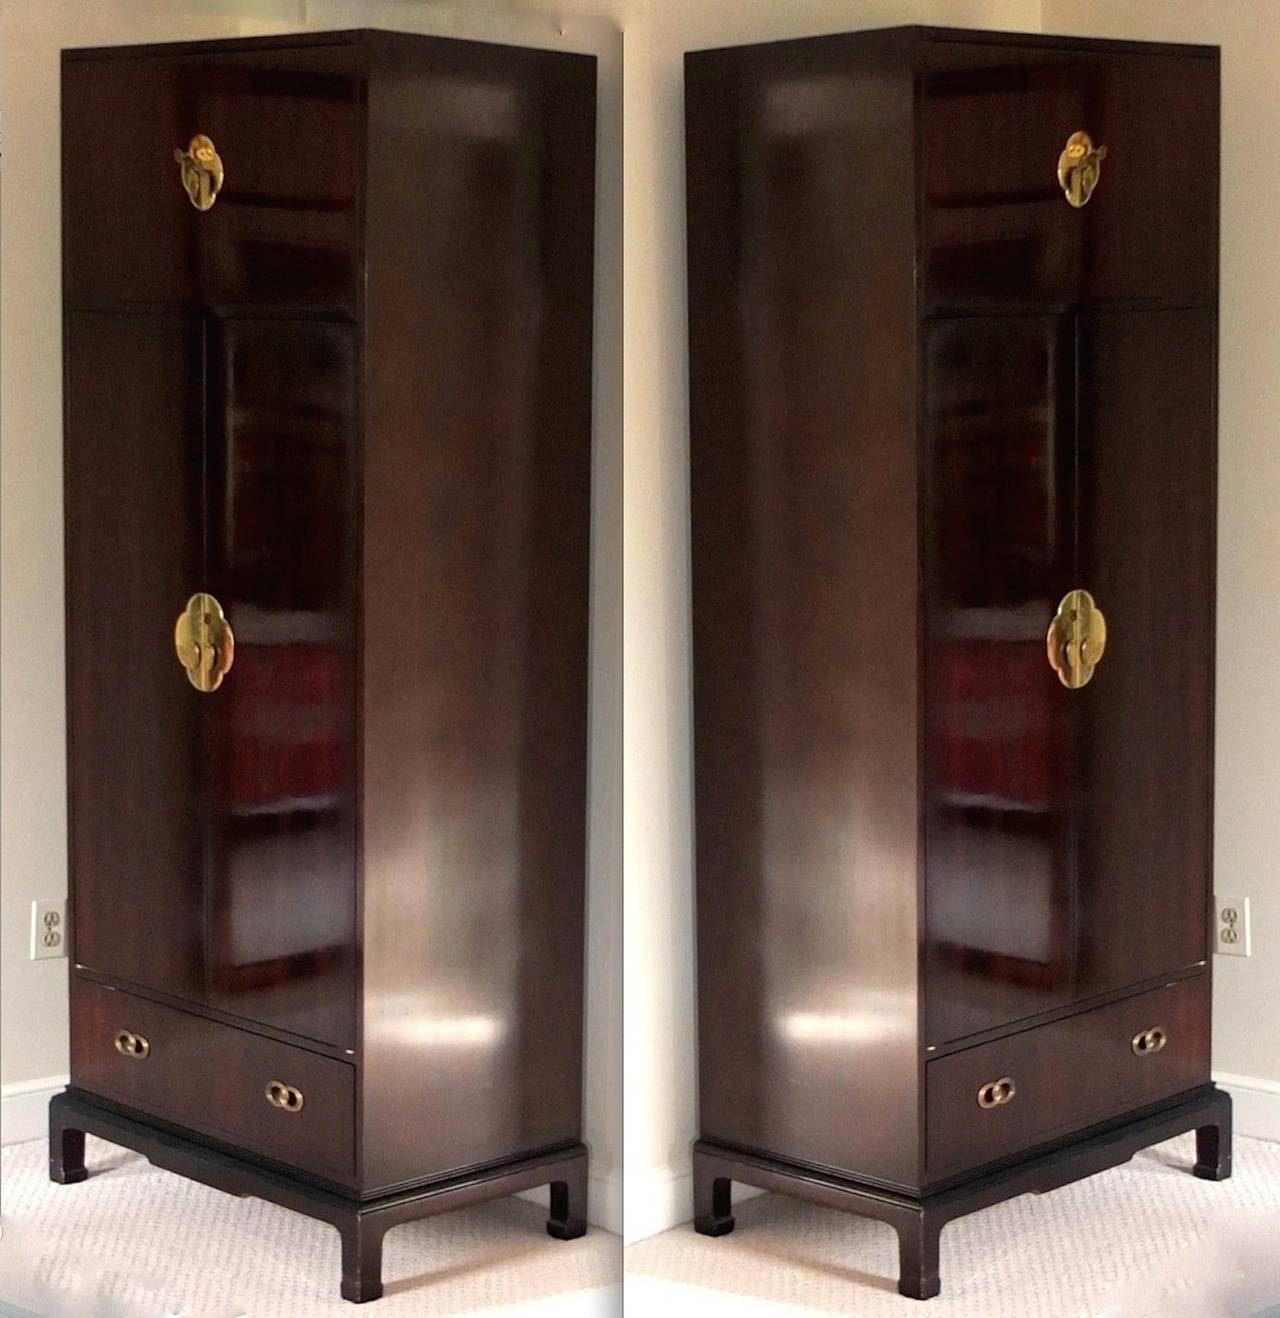 Pair of Ming style double door wardrobe chests by Henredon, circa 1982.

Finish is a dark mahogany with reddish undertones.  In normal light these appear quite dark brown with a highly polished finish. See images 5 - 9 which were taken outside in